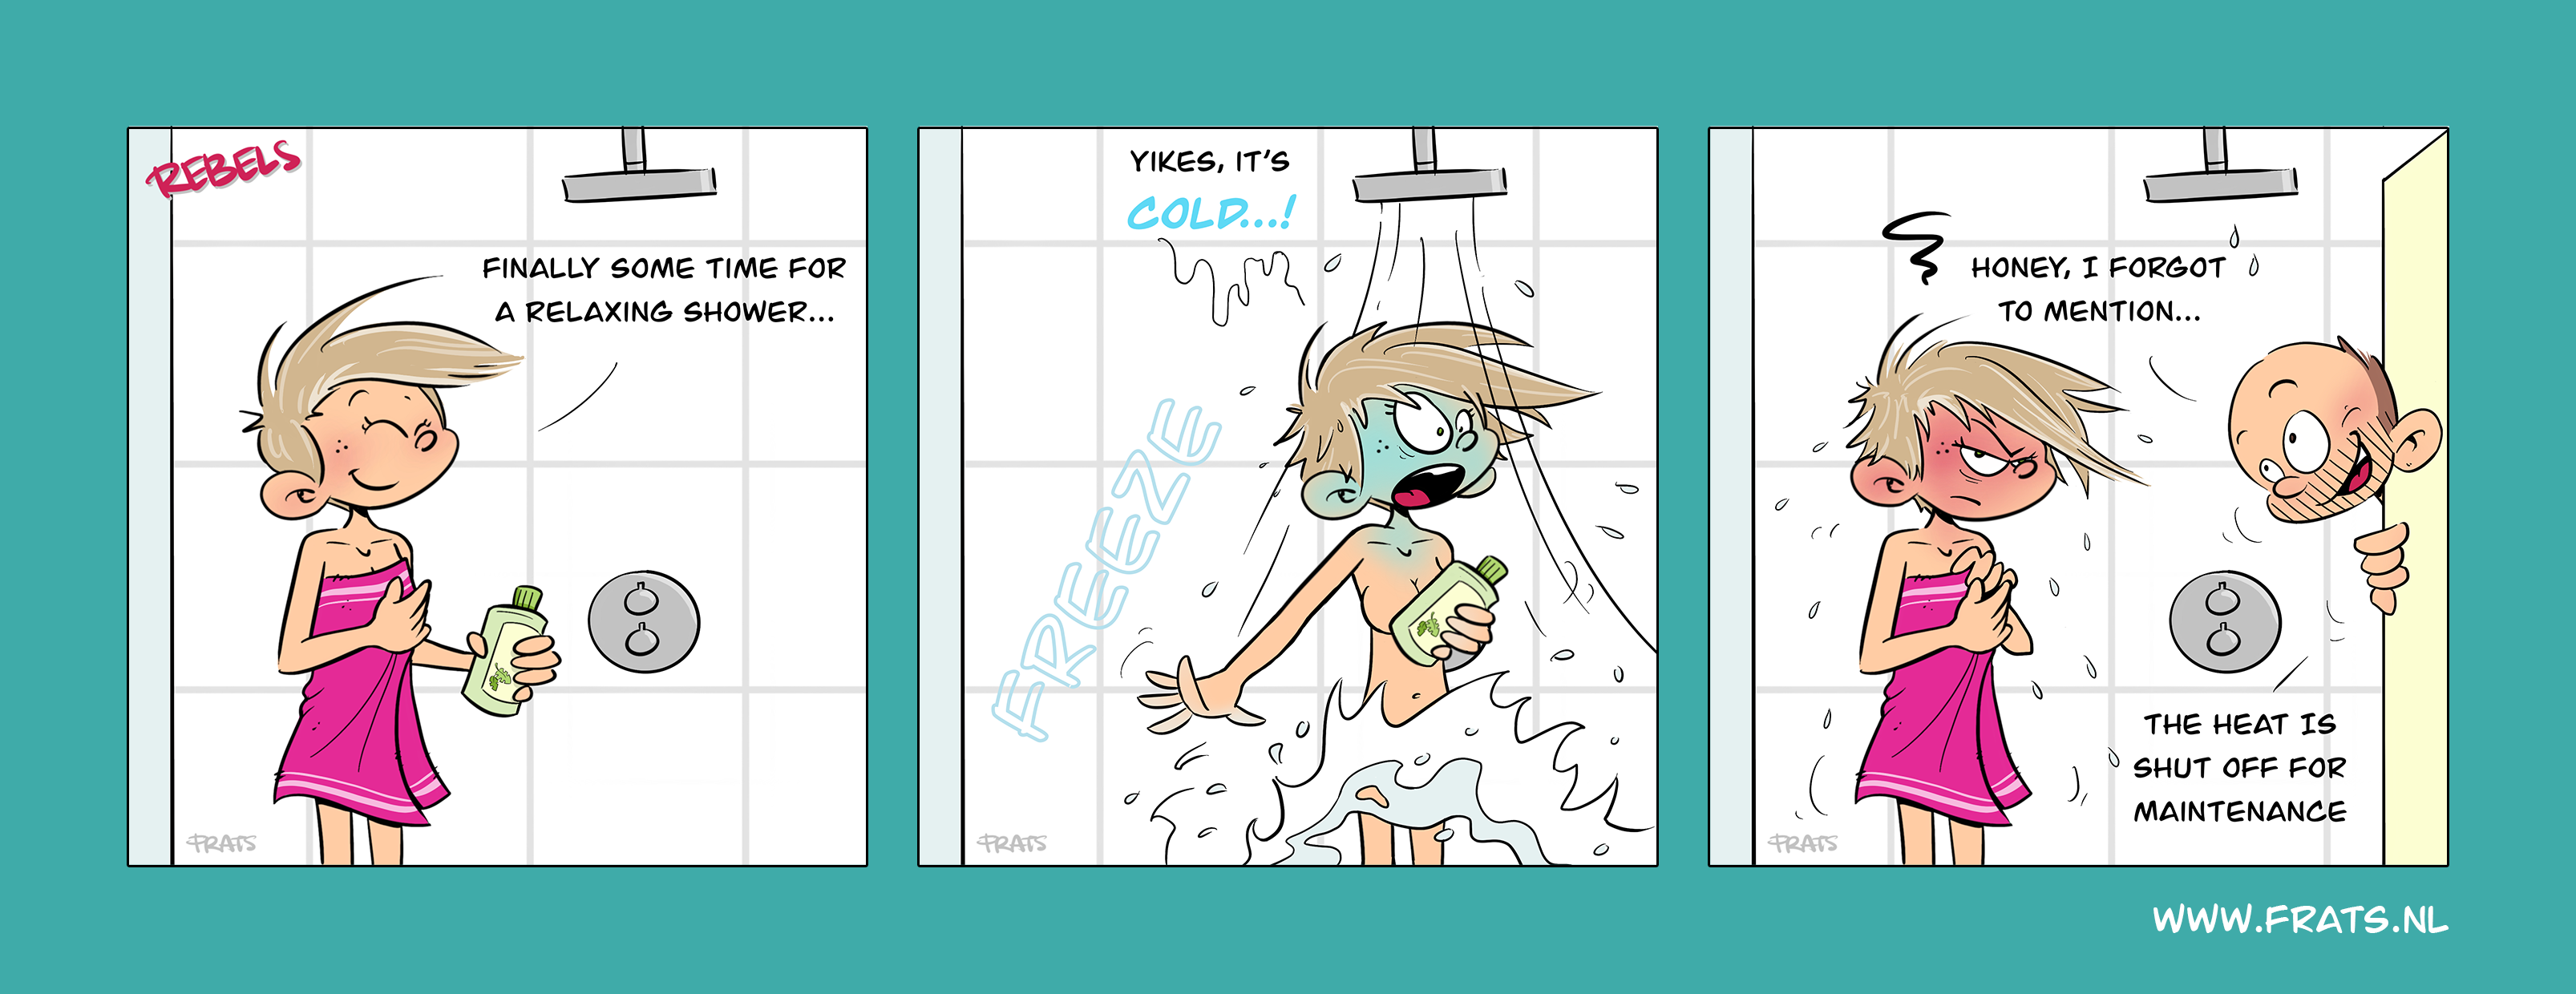 Rebels comic strip about taking a relaxing shower